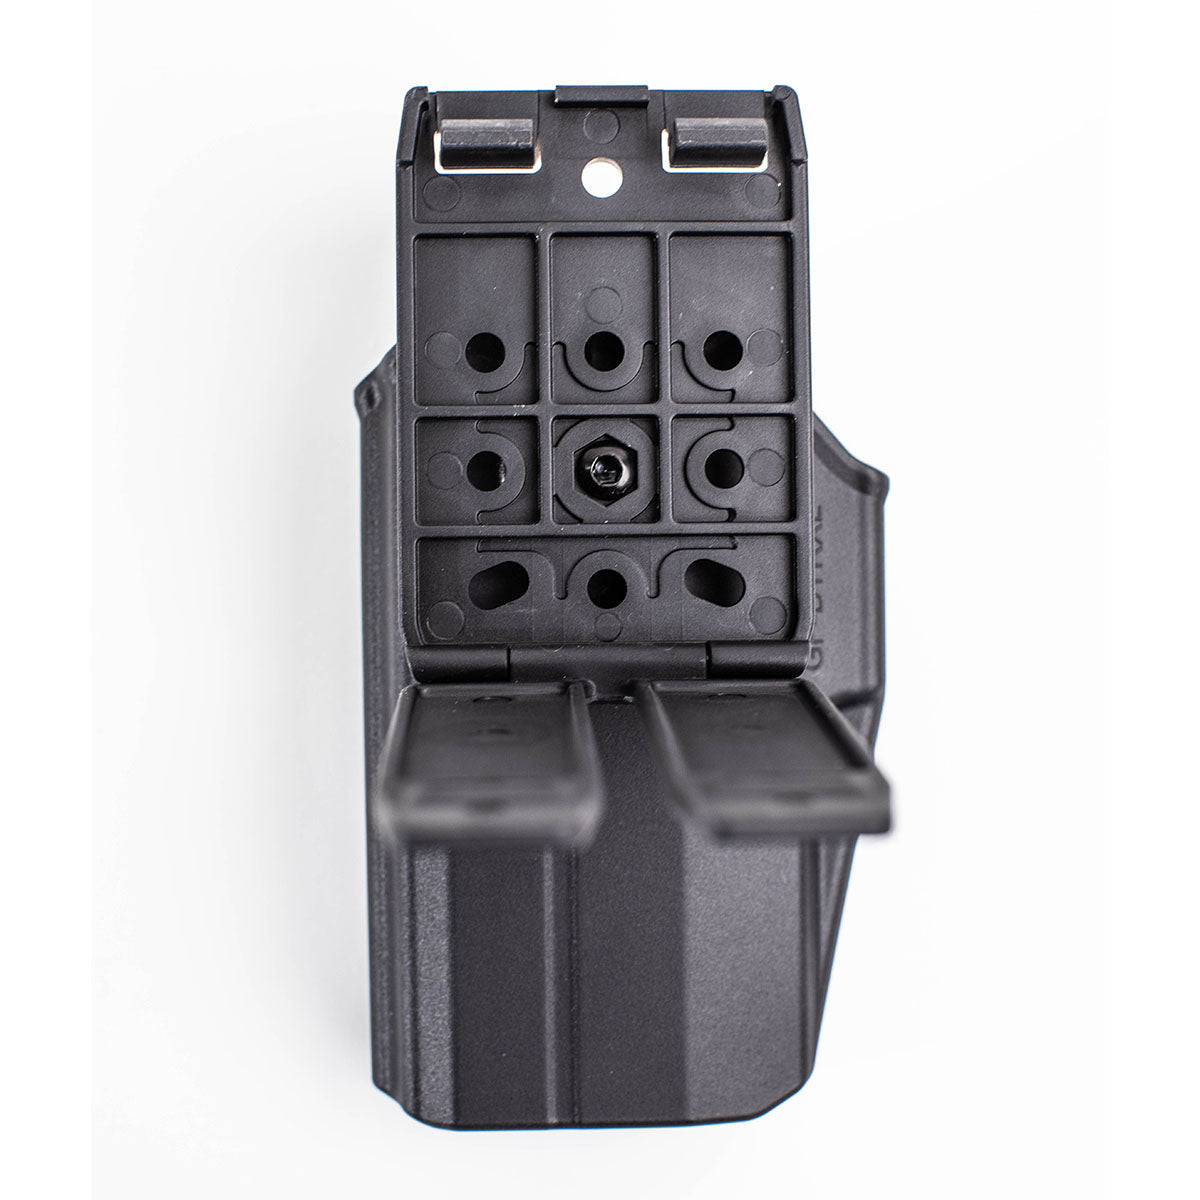 Level II Holster - MOLLE Adapter